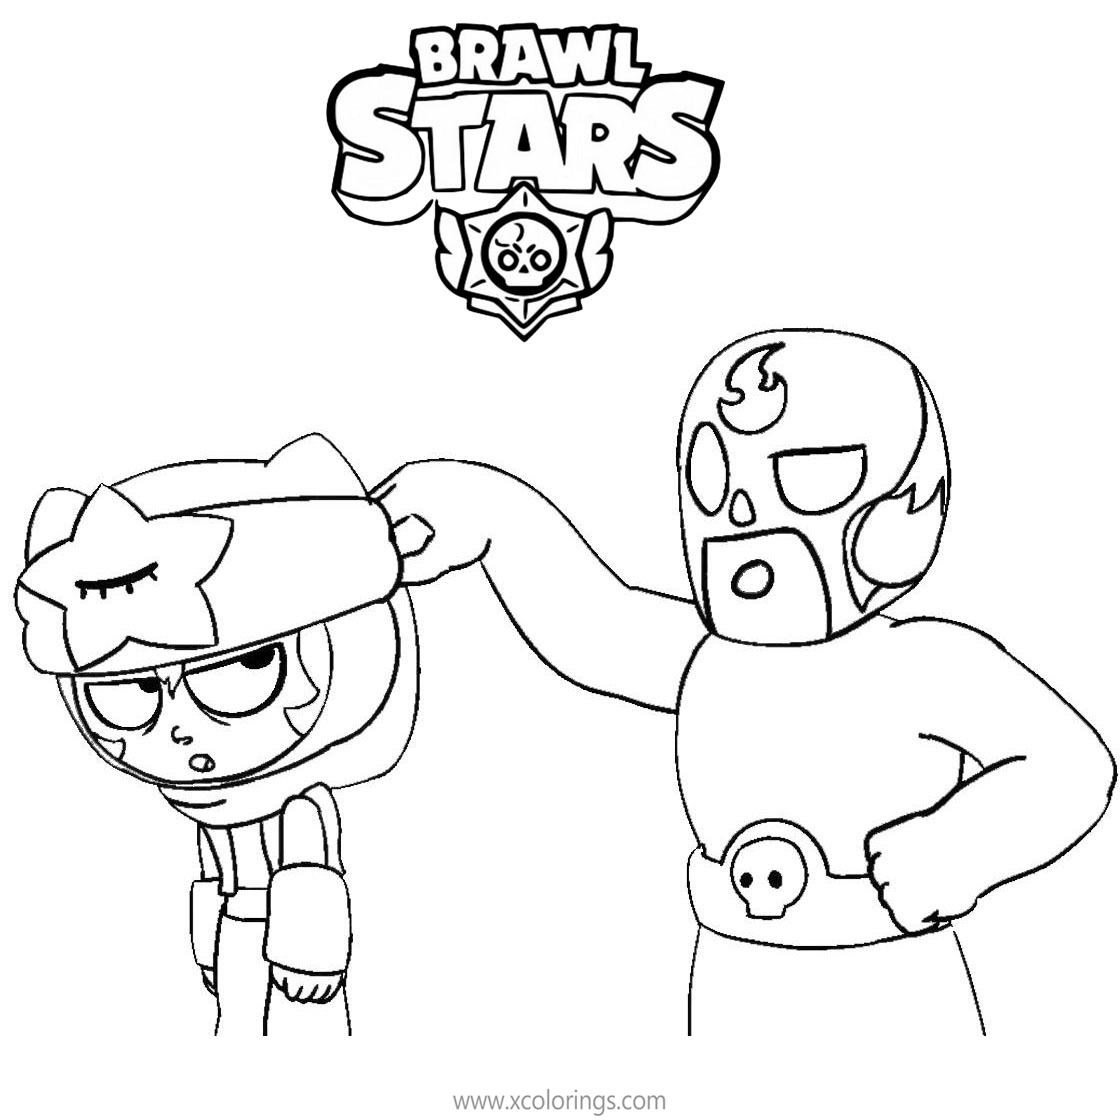 Free El Primo Brawl Stars Coloring Pages with Sandy printable